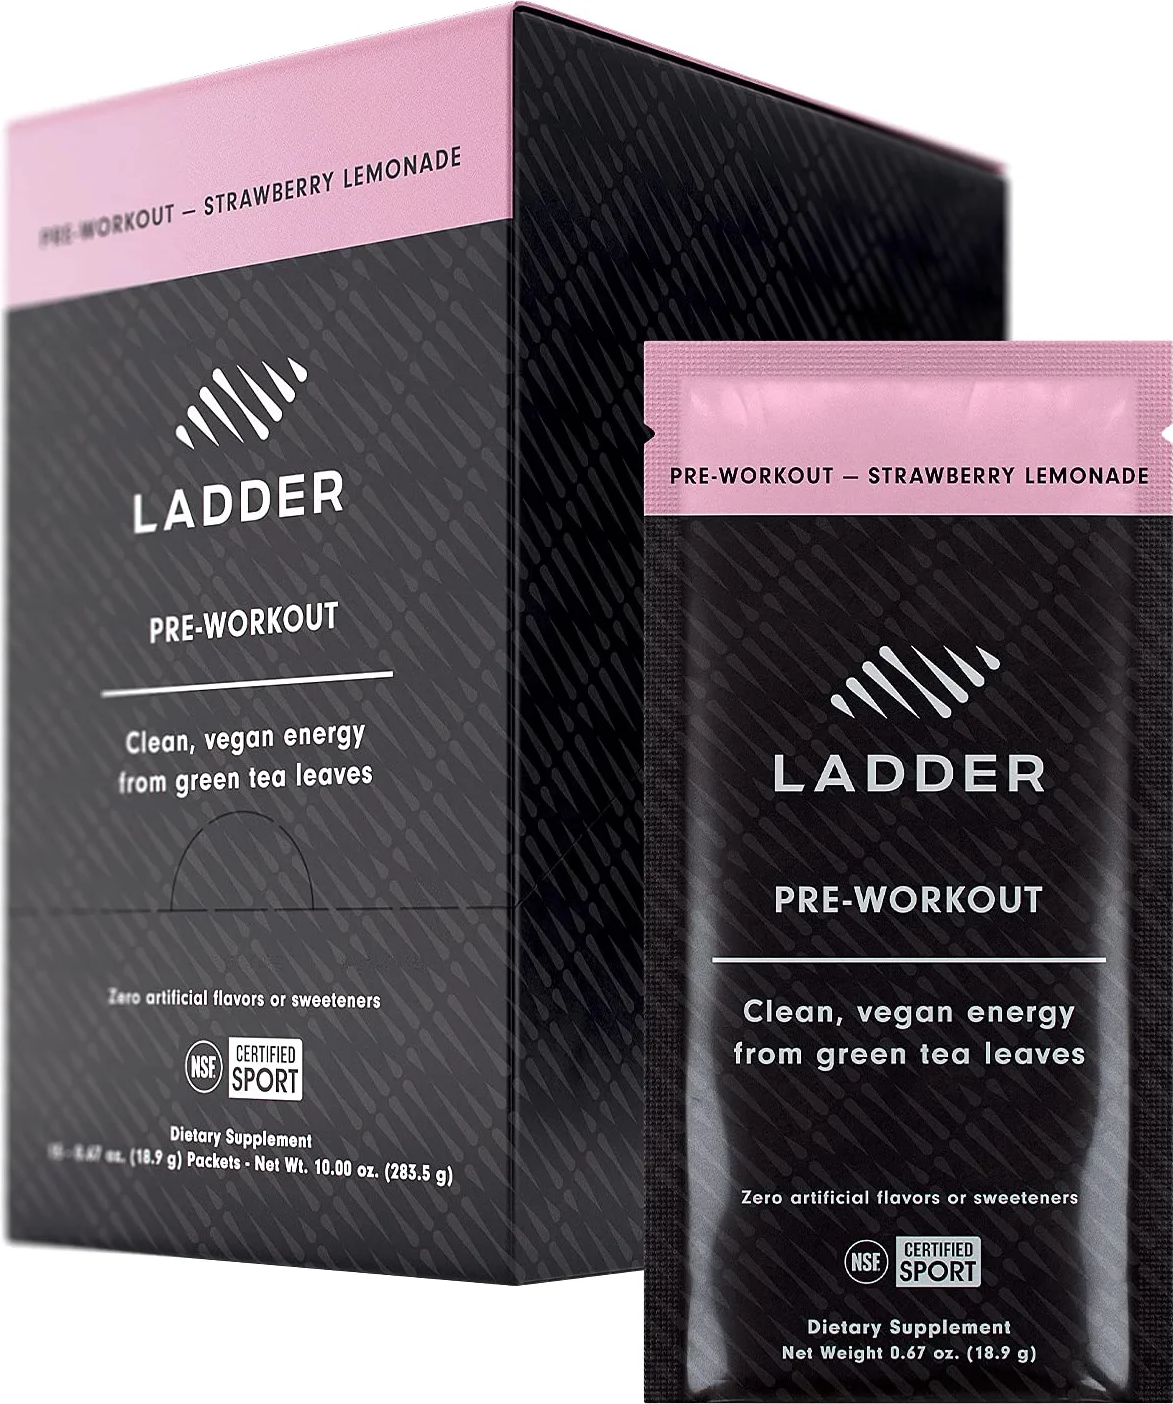  Ladder pre workout review for Weight Loss